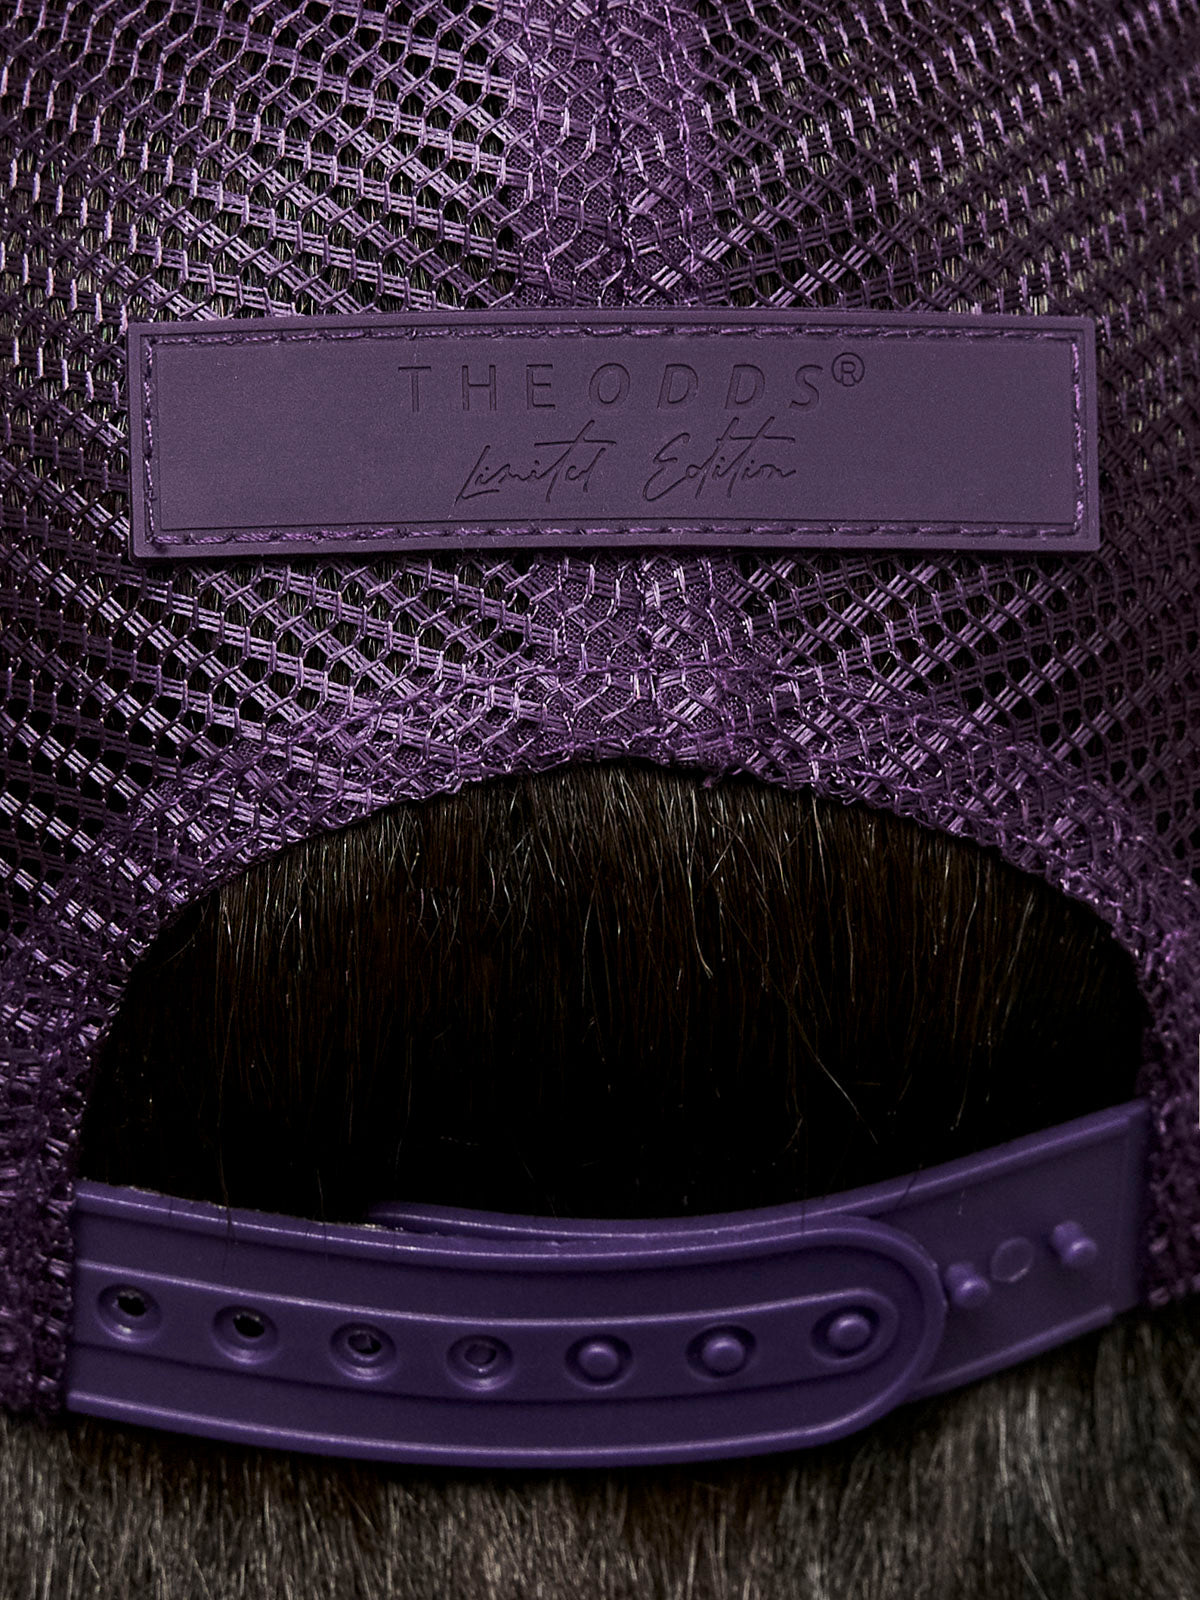 Limited Edition - Established 2021  Mulberry Purple Trucker Cap/ LMTD edition